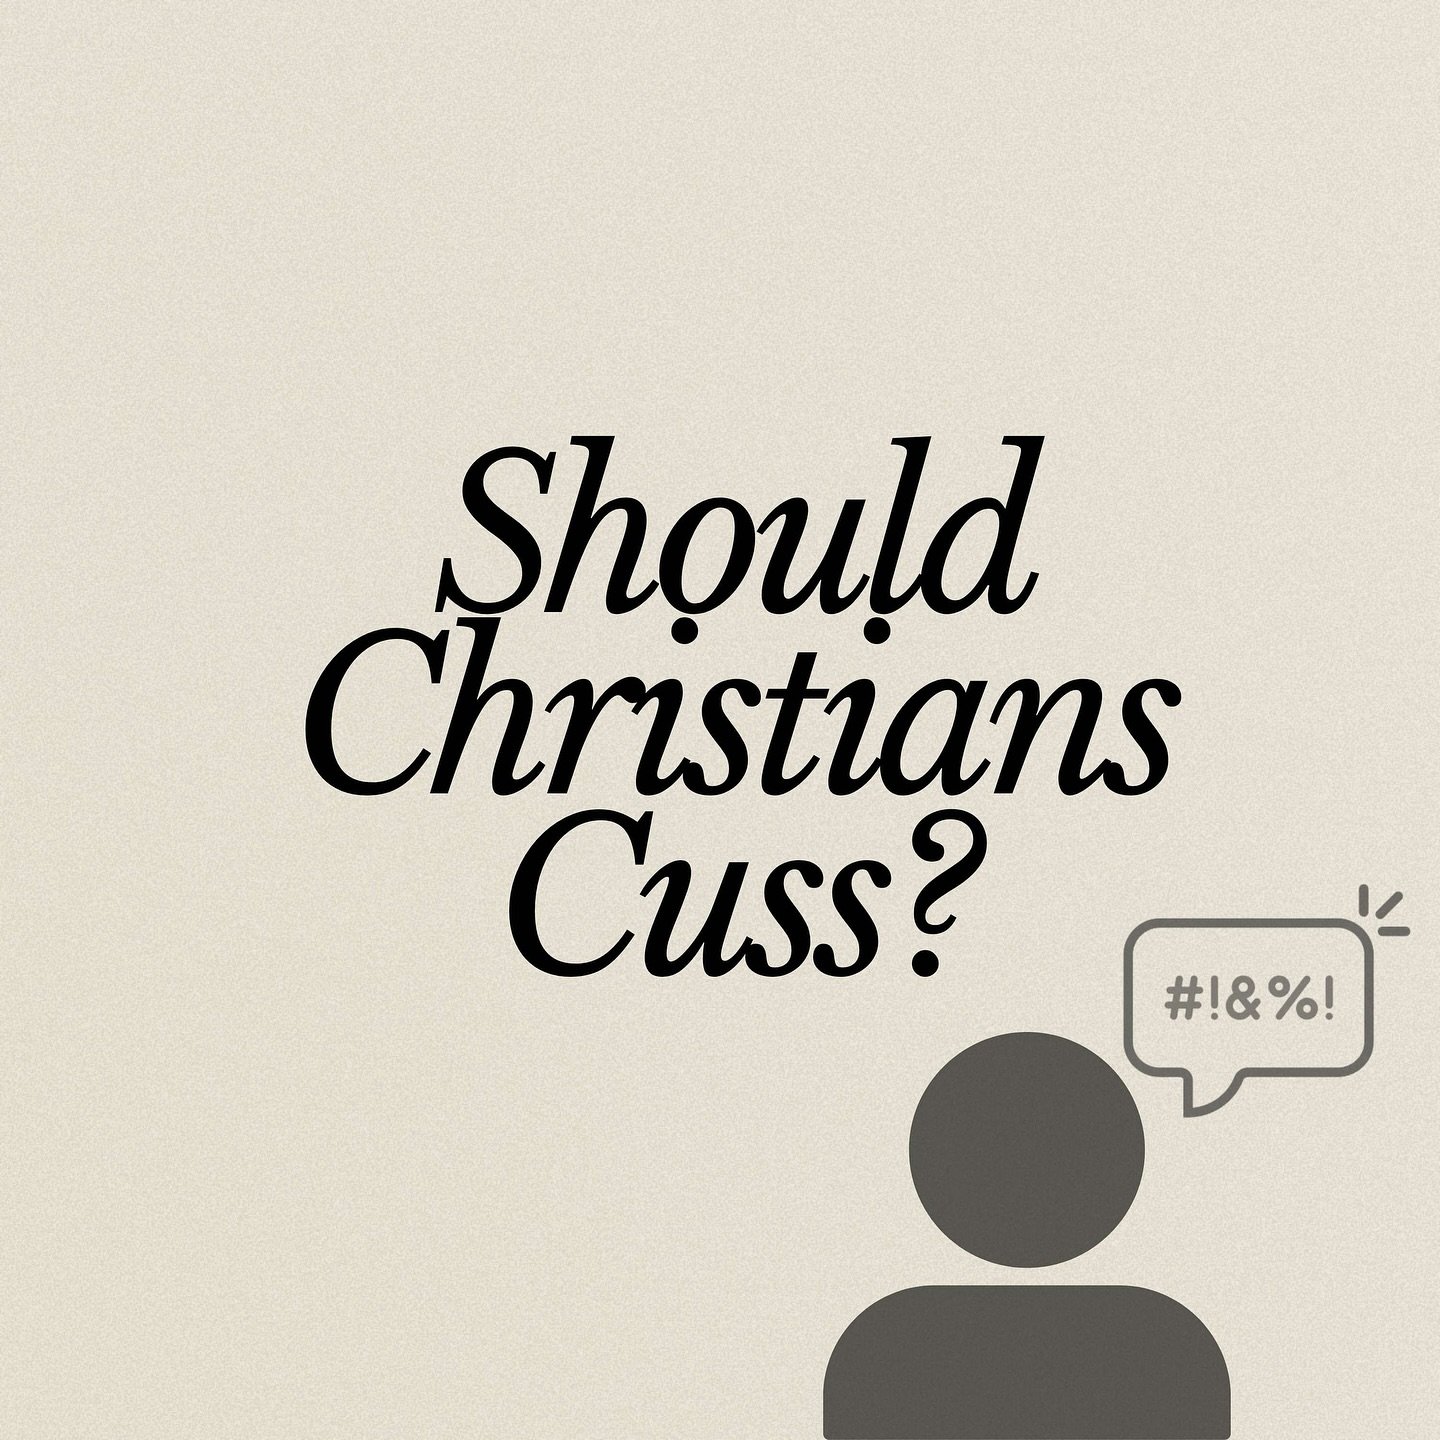 In this episode, 

@jonnyardavanis answers the question: Should Christians cuss? He also responds to four common objections:

1. Isn&rsquo;t language cultural?
2. Didn&rsquo;t Paul say the &ldquo;S&rdquo; word in Philippians 3?
3. Doesn't Paul say th